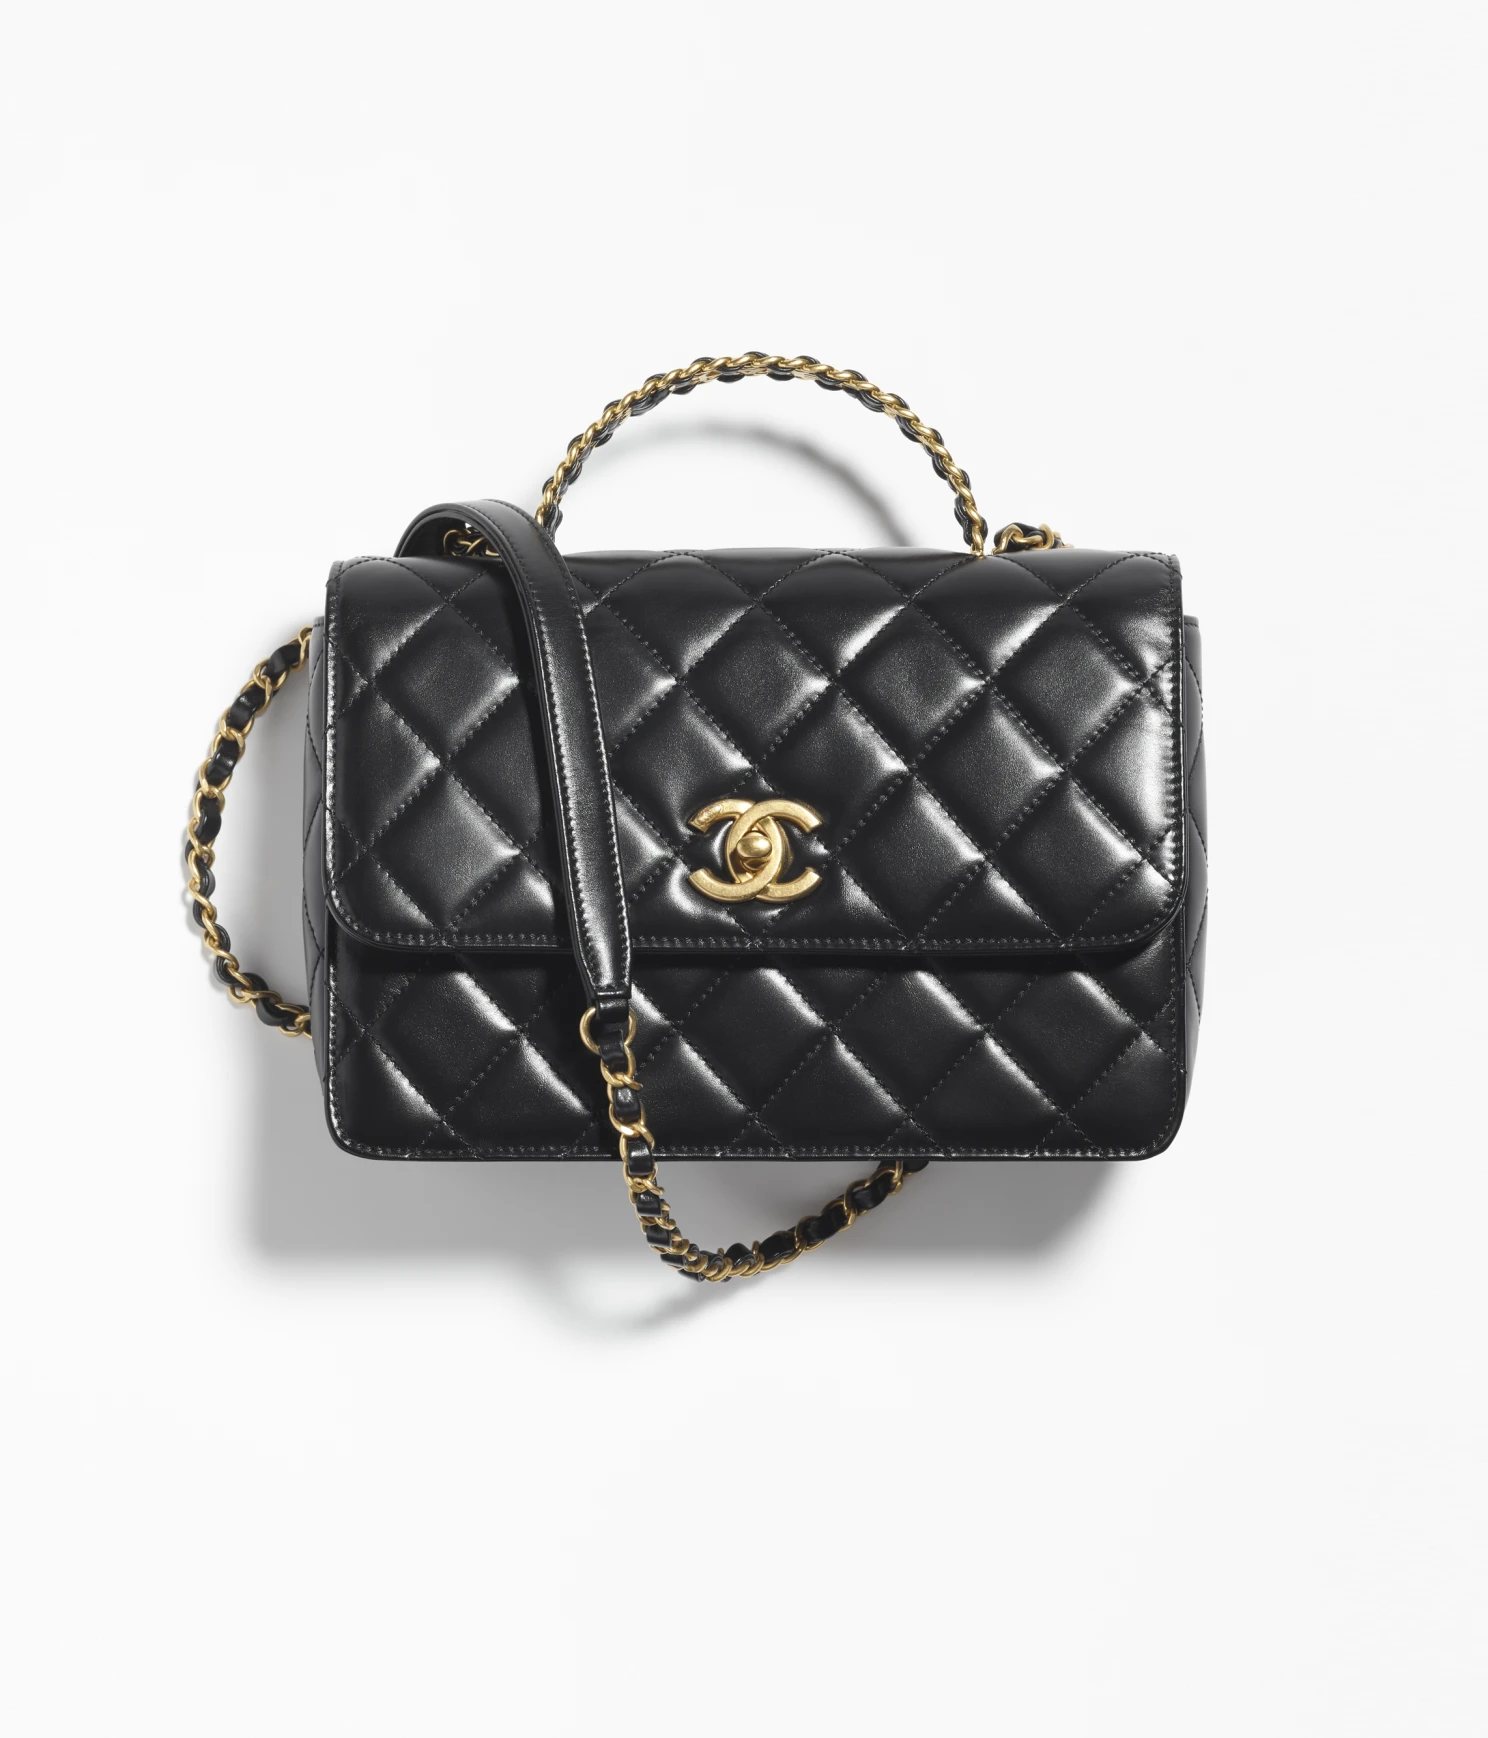 Chanel Small Flap Handle Bag - Private customized